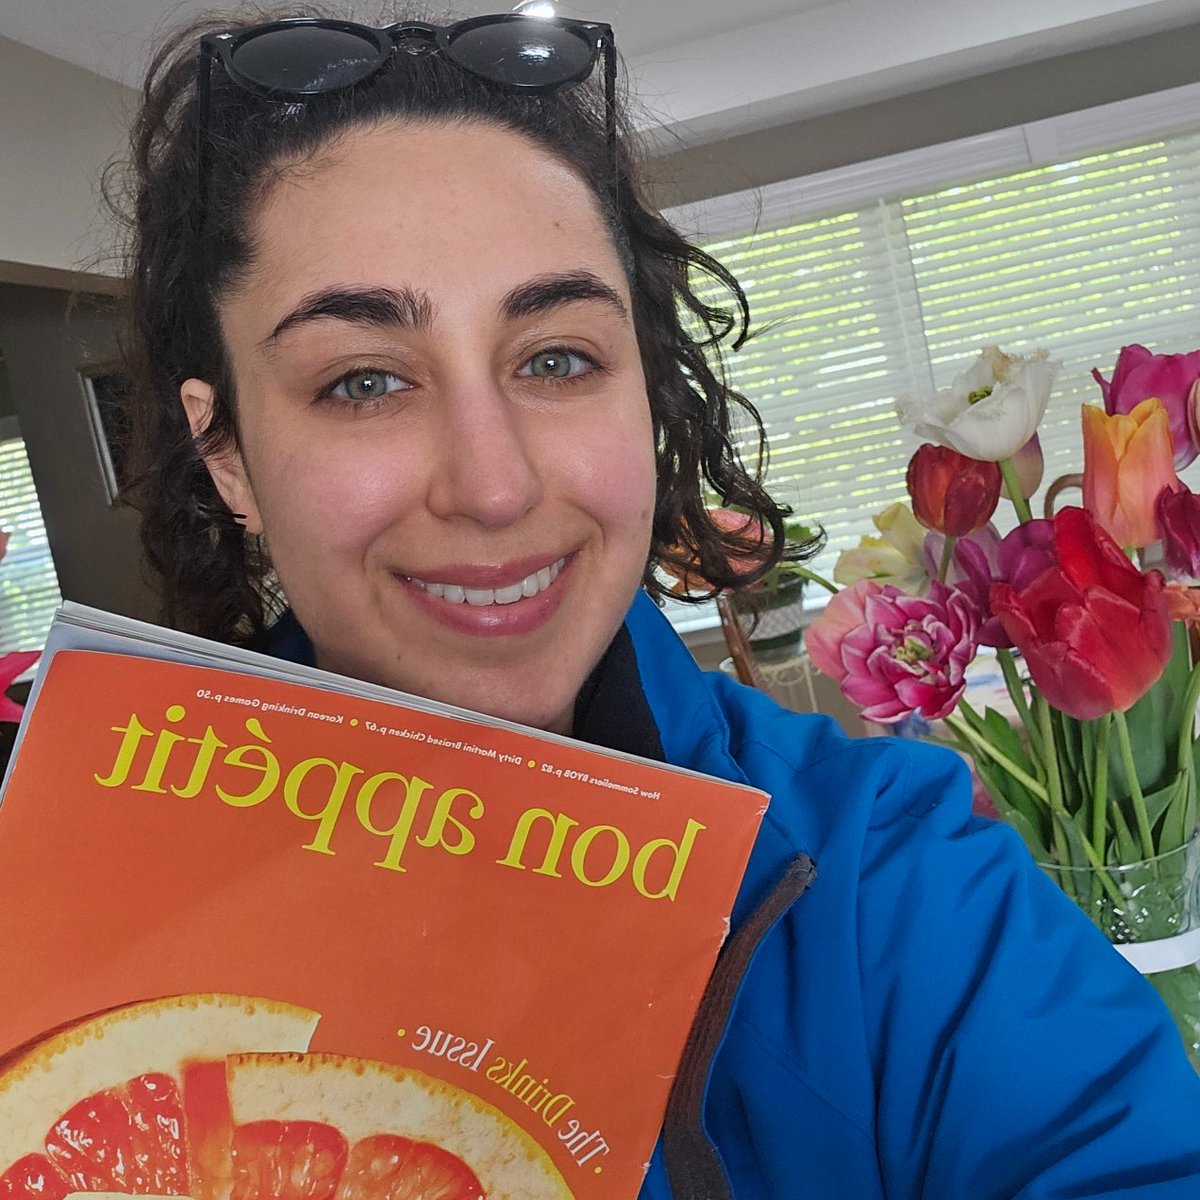 Selfie featuring @HollandRidge tulips to celebrate my latest work for @bonappetit! Buy your copy of the May issue wherever mags are sold. 😎 

P.S. I'm available to write about all things food, travel and Buffalo. But I've also covered green energy/building, TV and more!